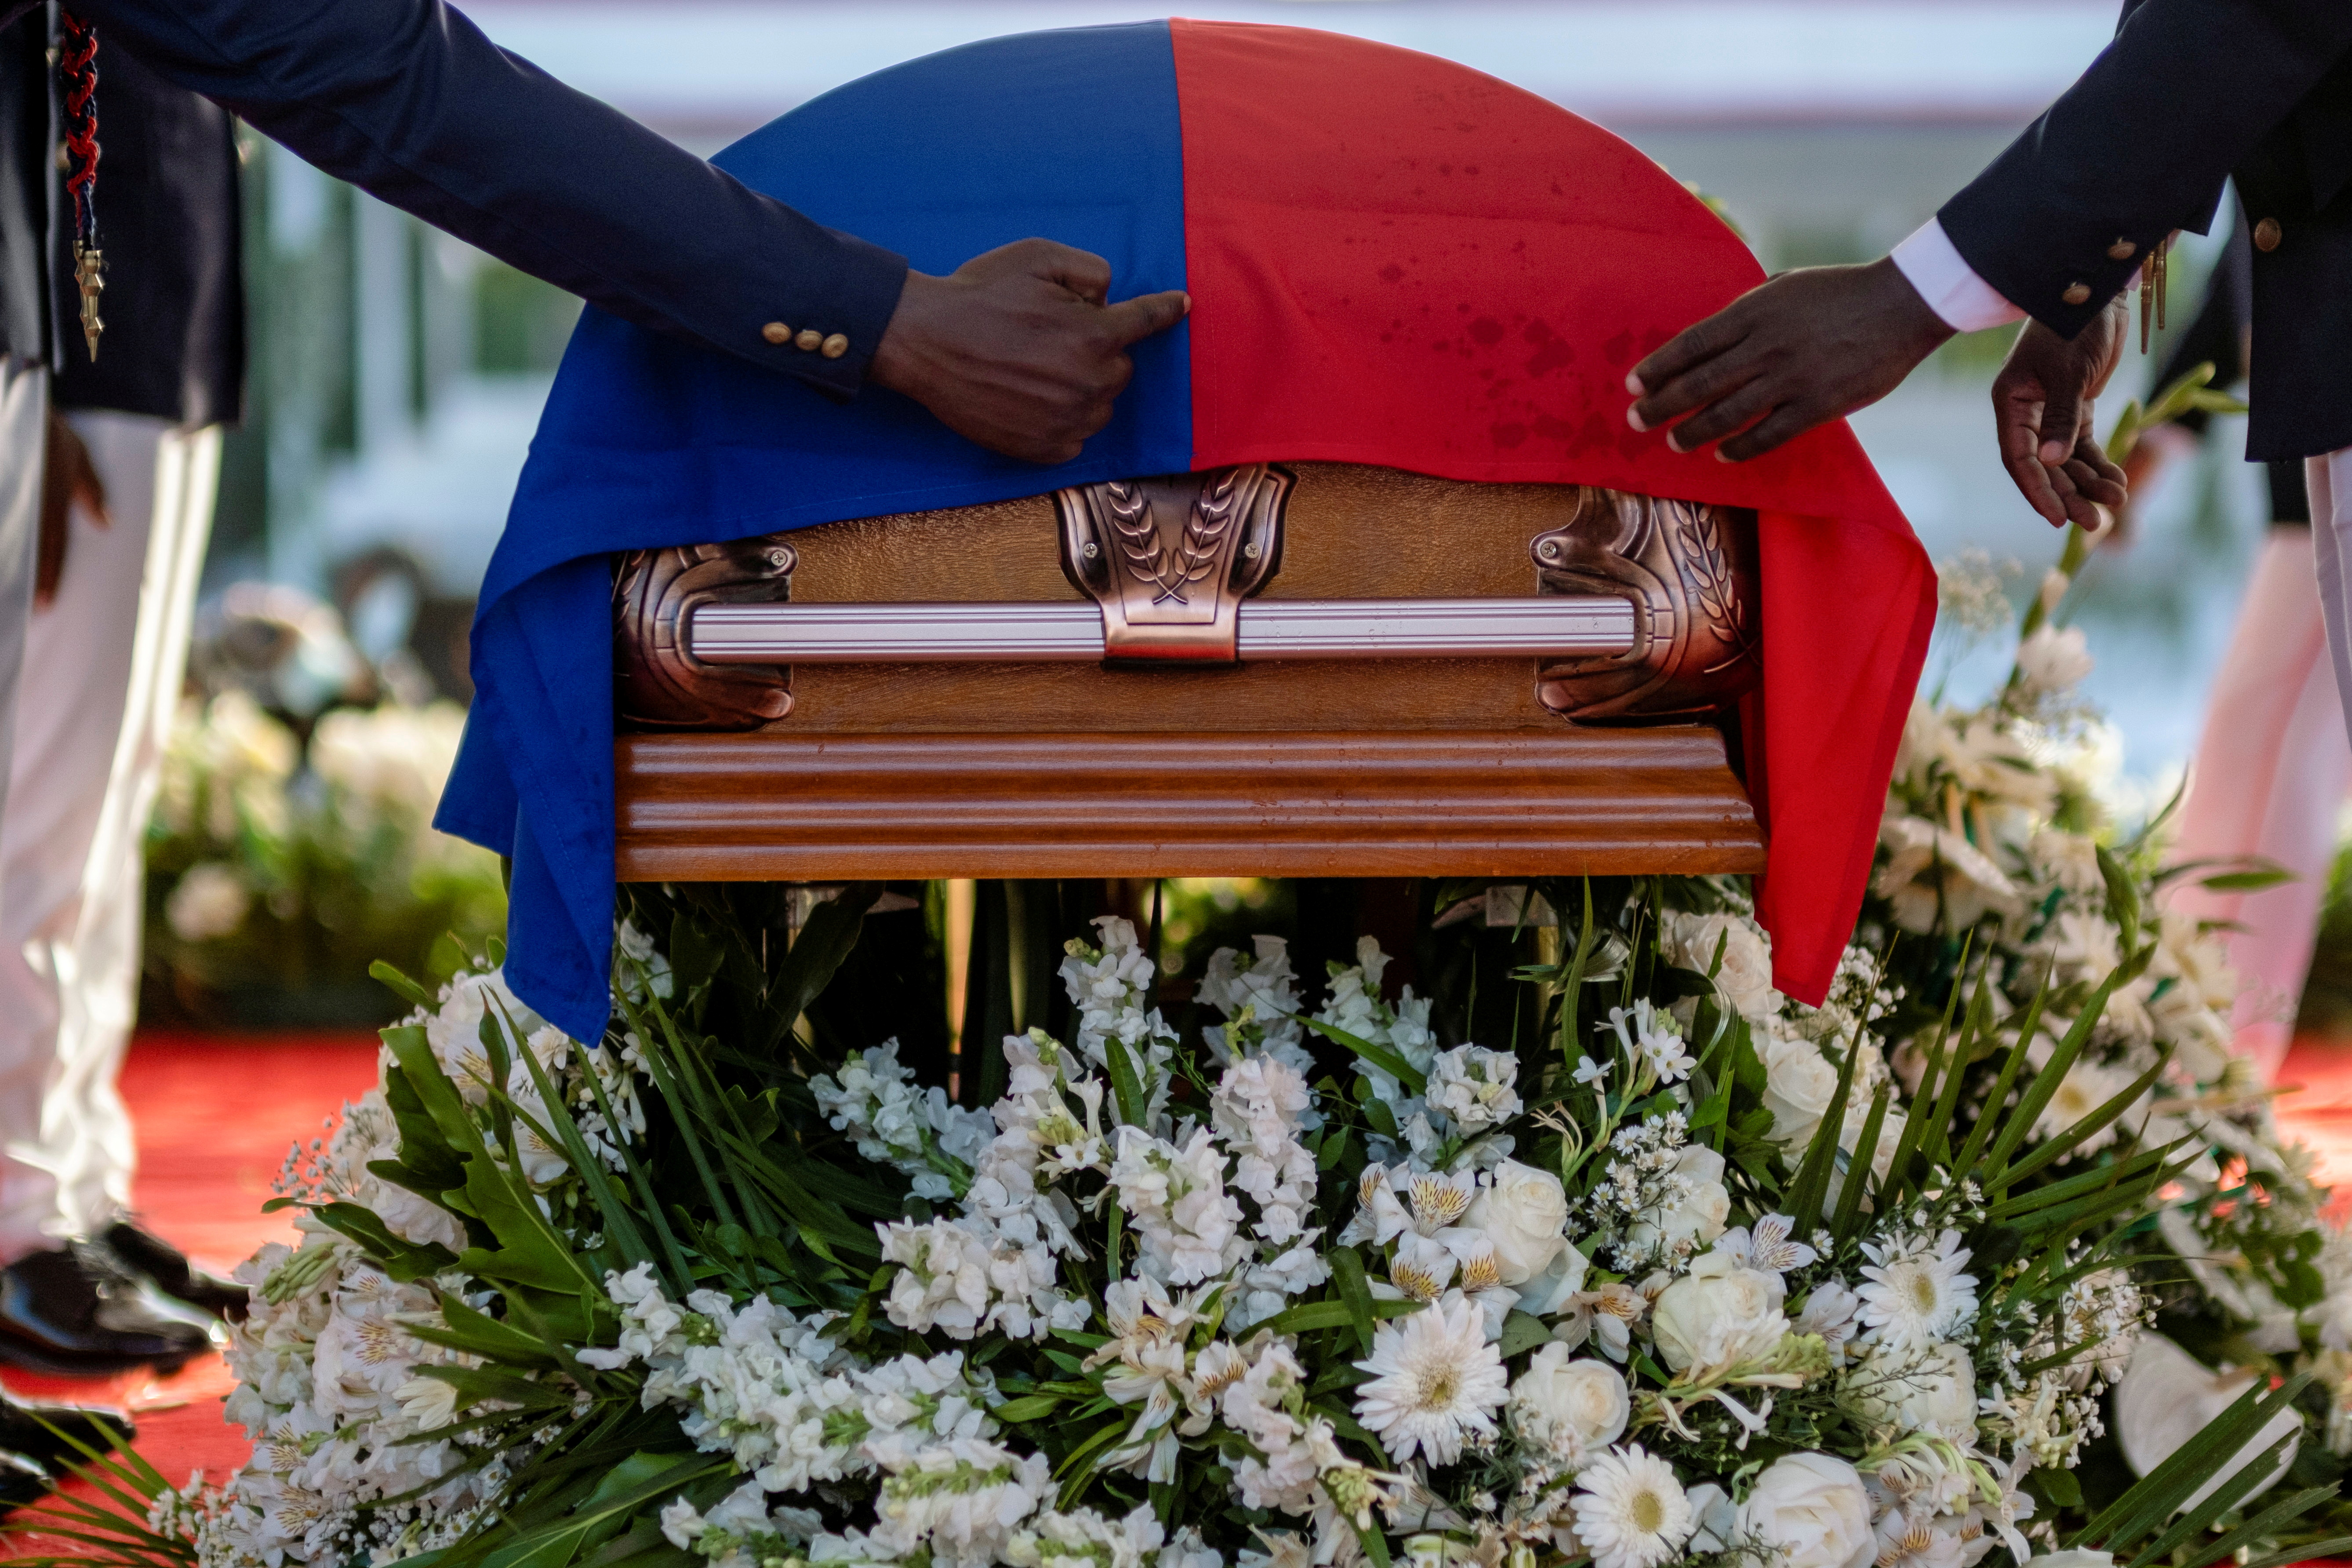 Presidential honor guards place a national flag over the coffin of late Haitian President Jovenel Moise, who was shot dead earlier this month, during the funeral at his family home in Cap-Haitien, Haiti, July 23, 2021. REUTERS/Ricardo Arduengo/File Photo